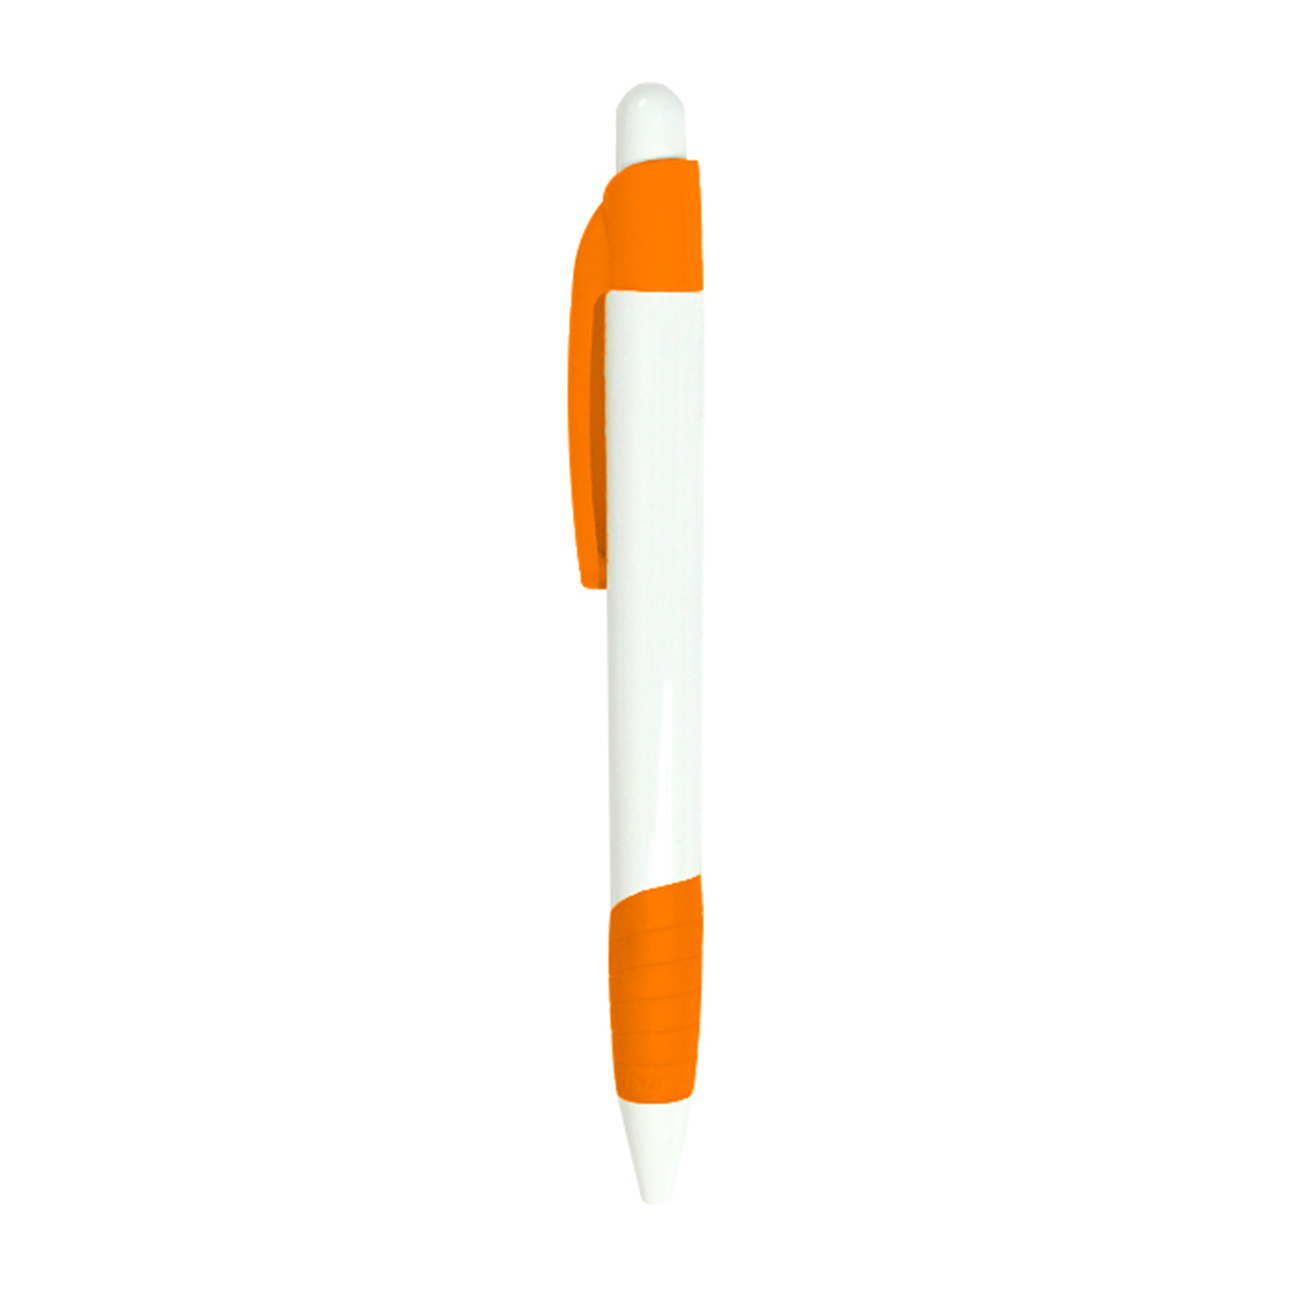 BOLIGRAFO SYDNEY STYB ESPAÑOL BLANCO NARANJA 236 - New People´s Products, Promotional Items, Material, Products